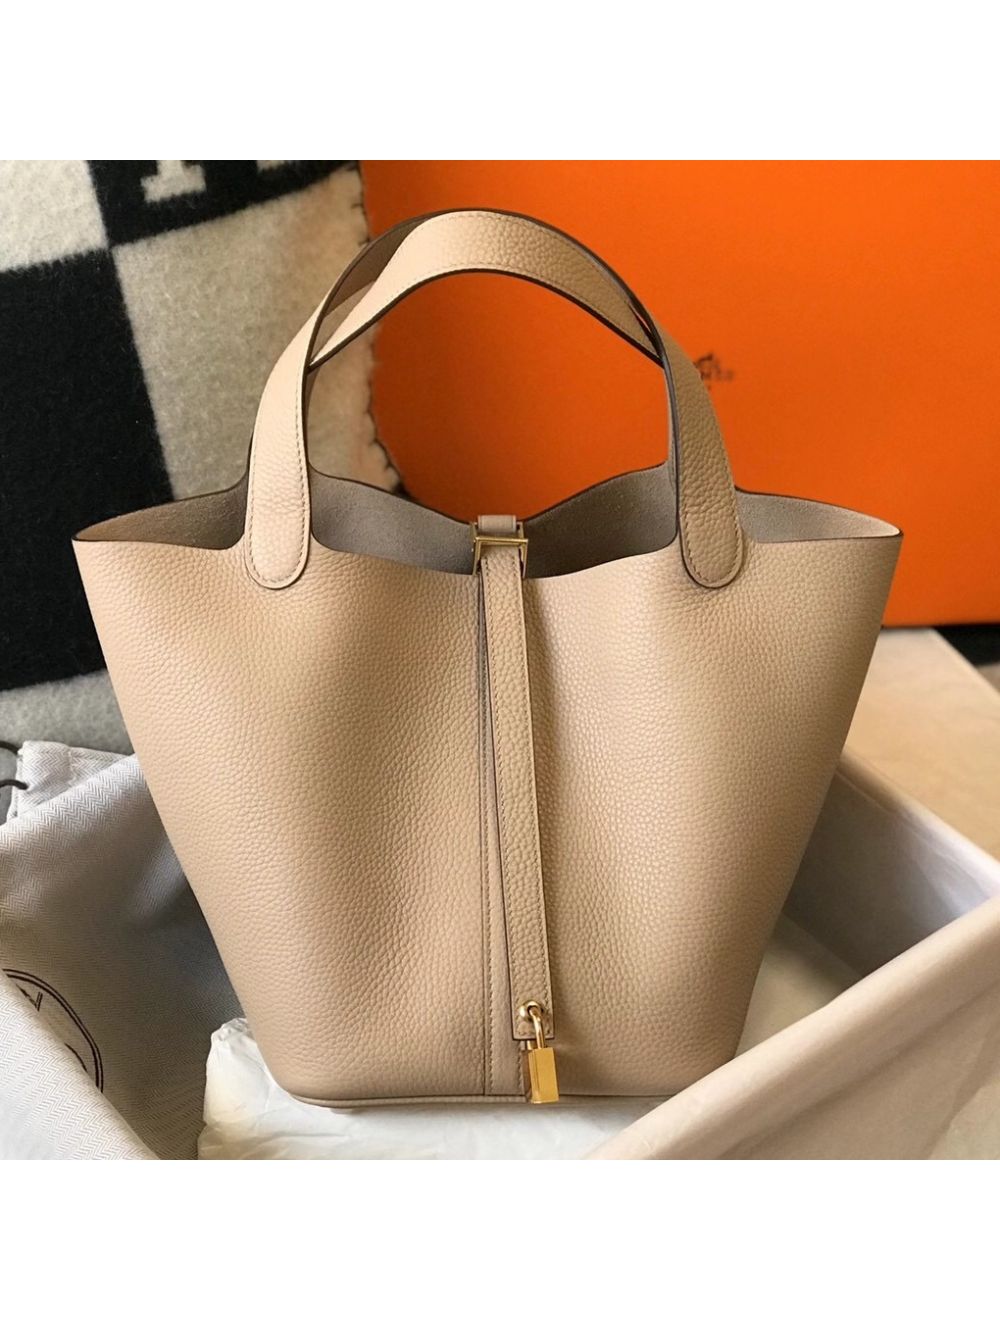 HERMES Picotin Lock 18 Taurillon Clemence Leather Tote Bag Taupe